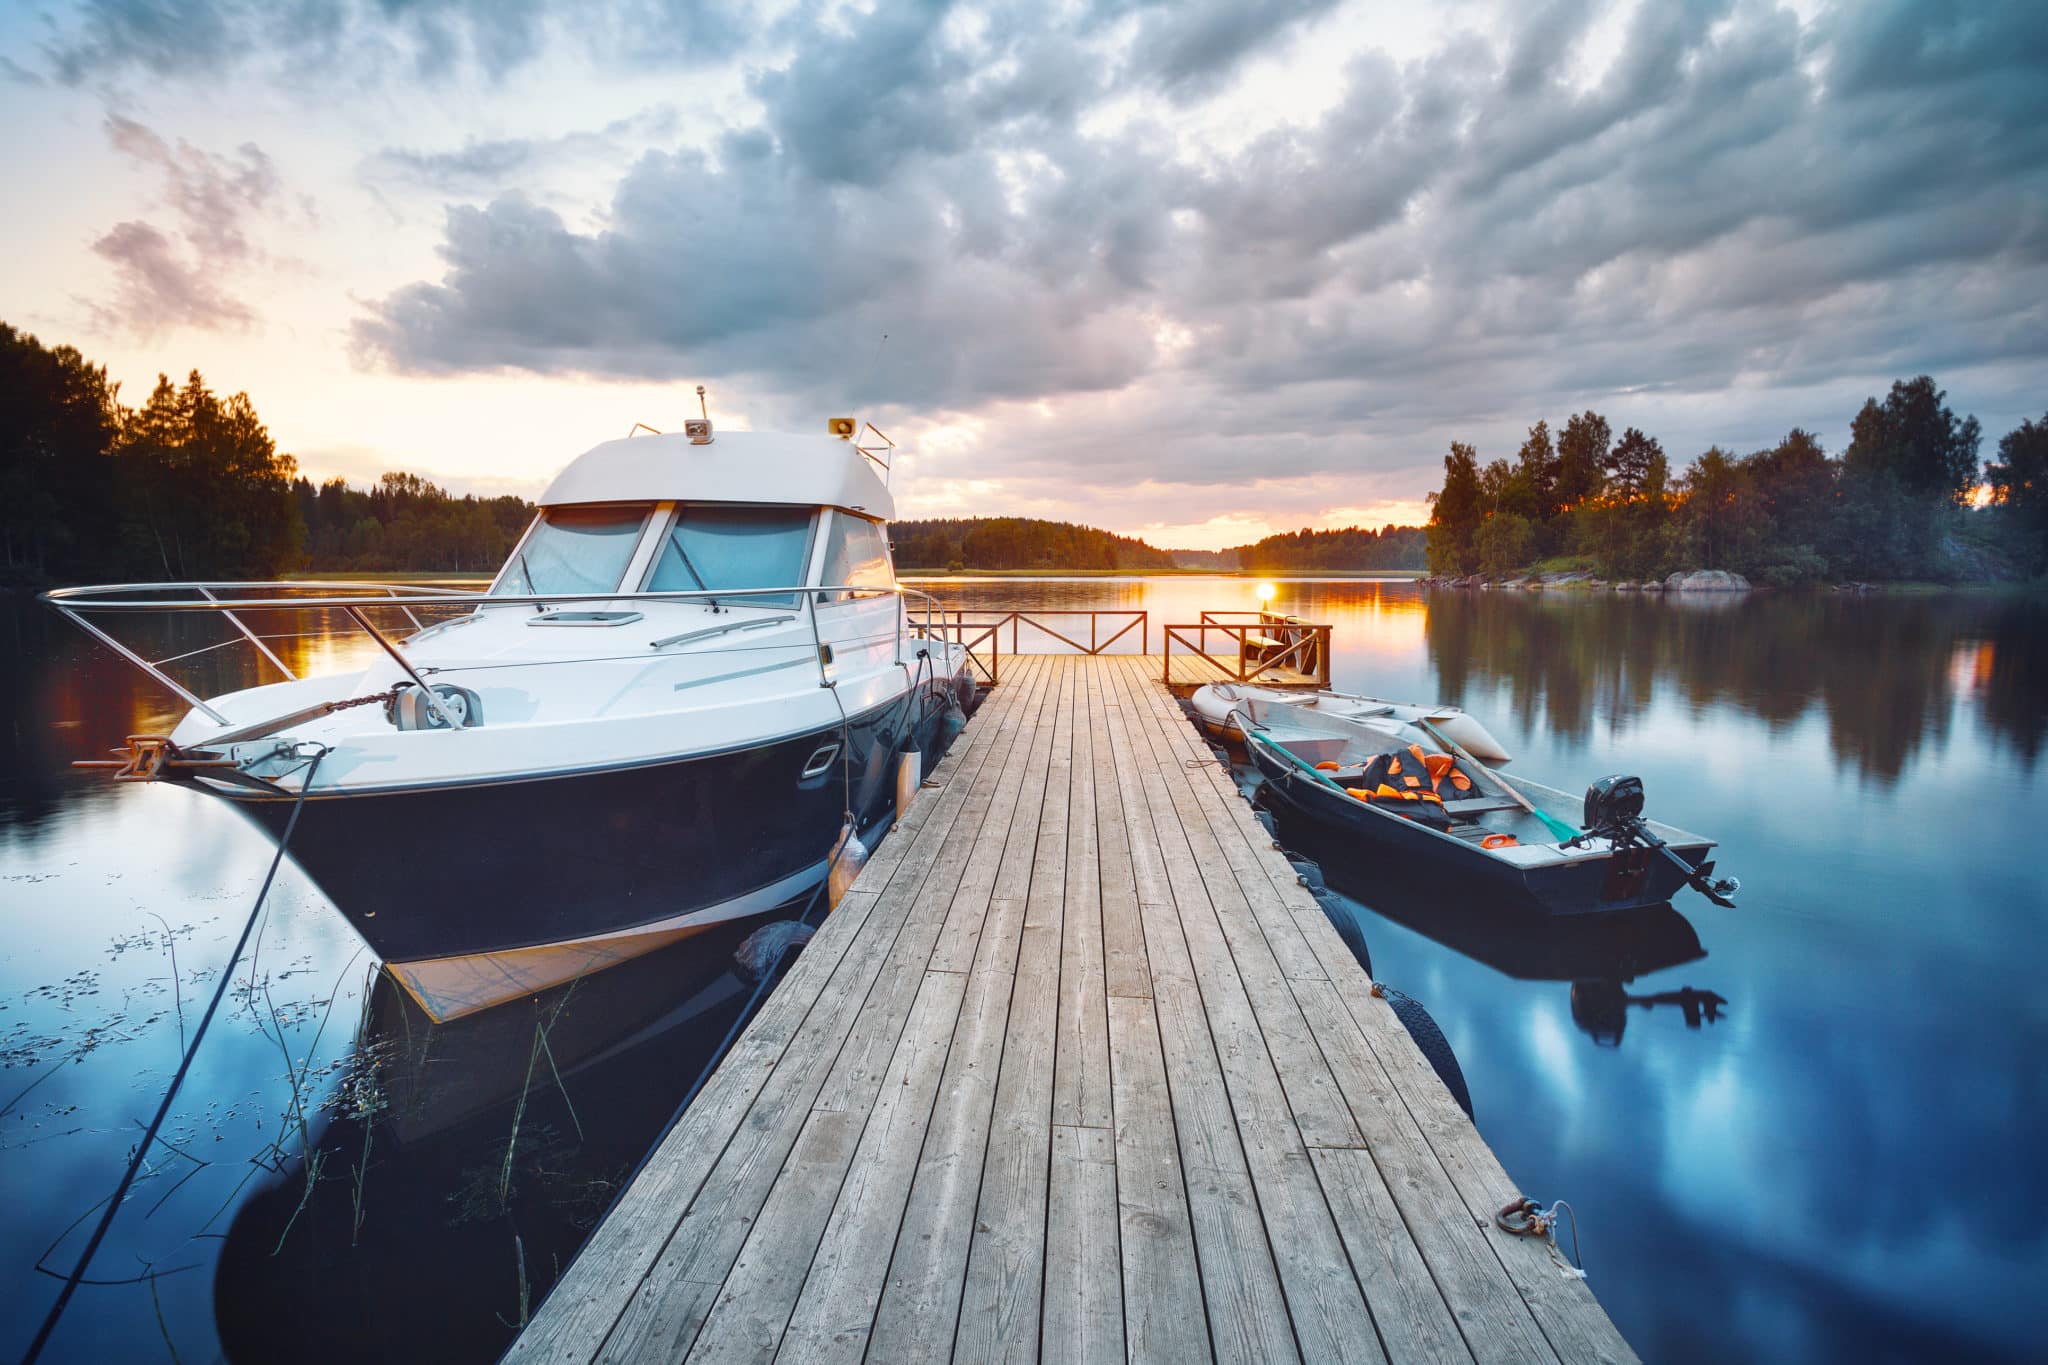 10 Must-Have Boat Safety Equipment for Your Boat